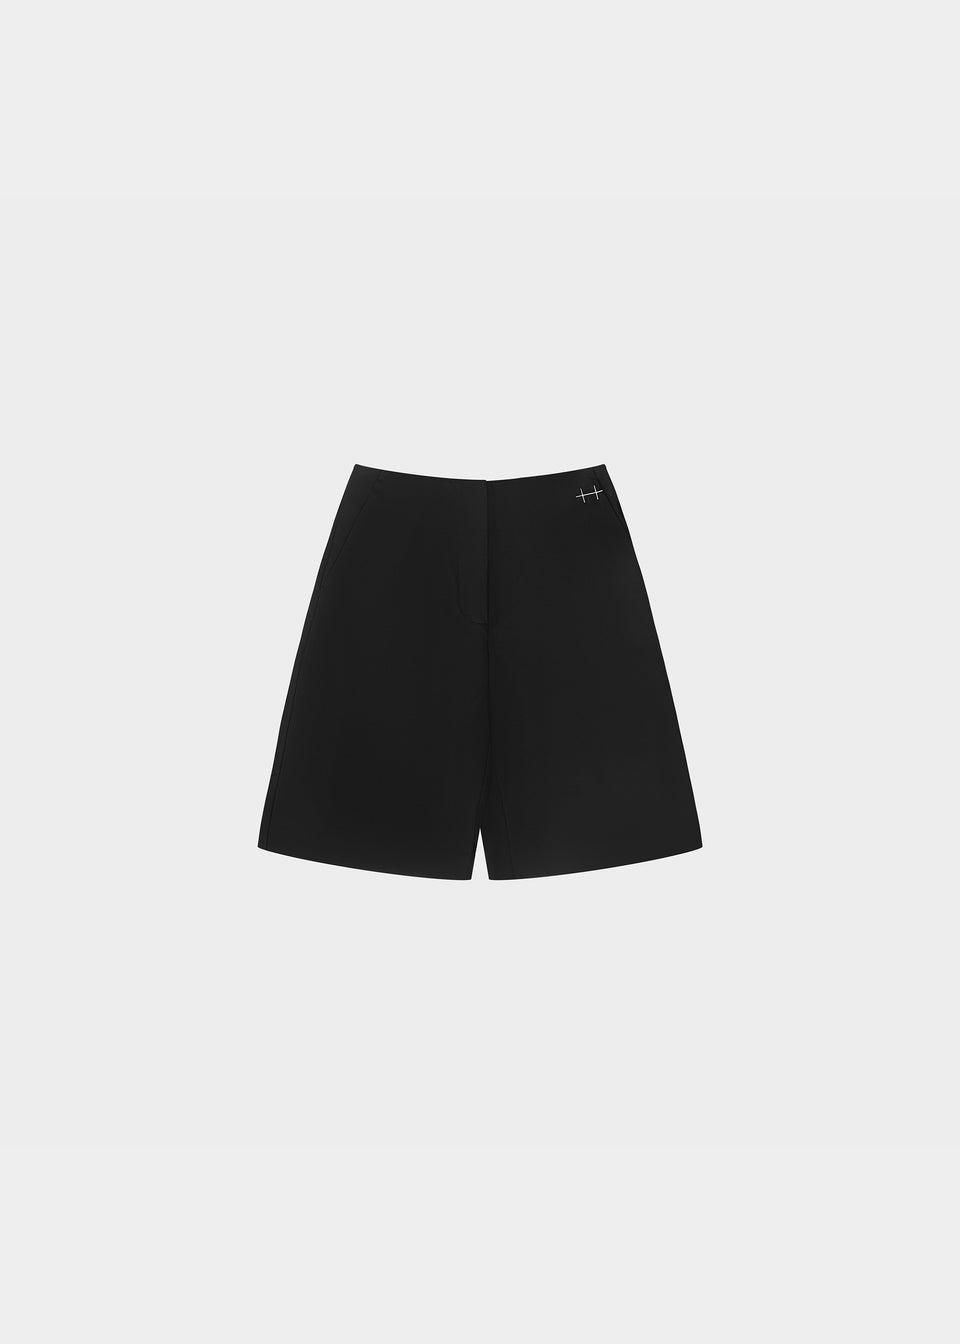 SEPAL TAILORED SHORTS by HELIOT EMIL